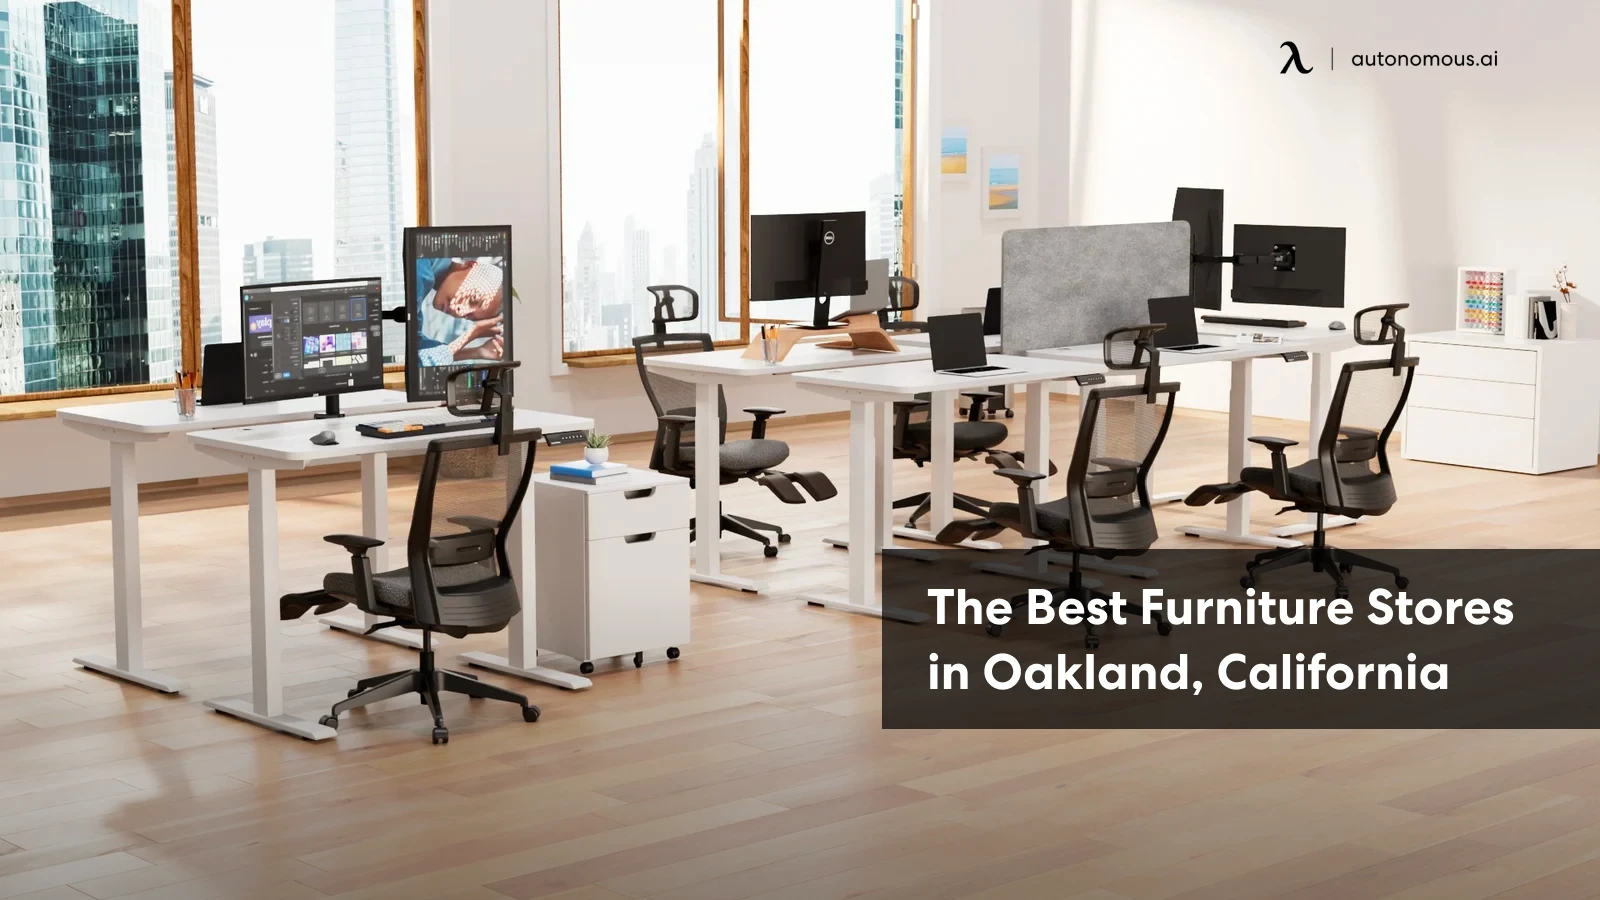 Oakland Furniture Stores: Top Picks and Buying Guide